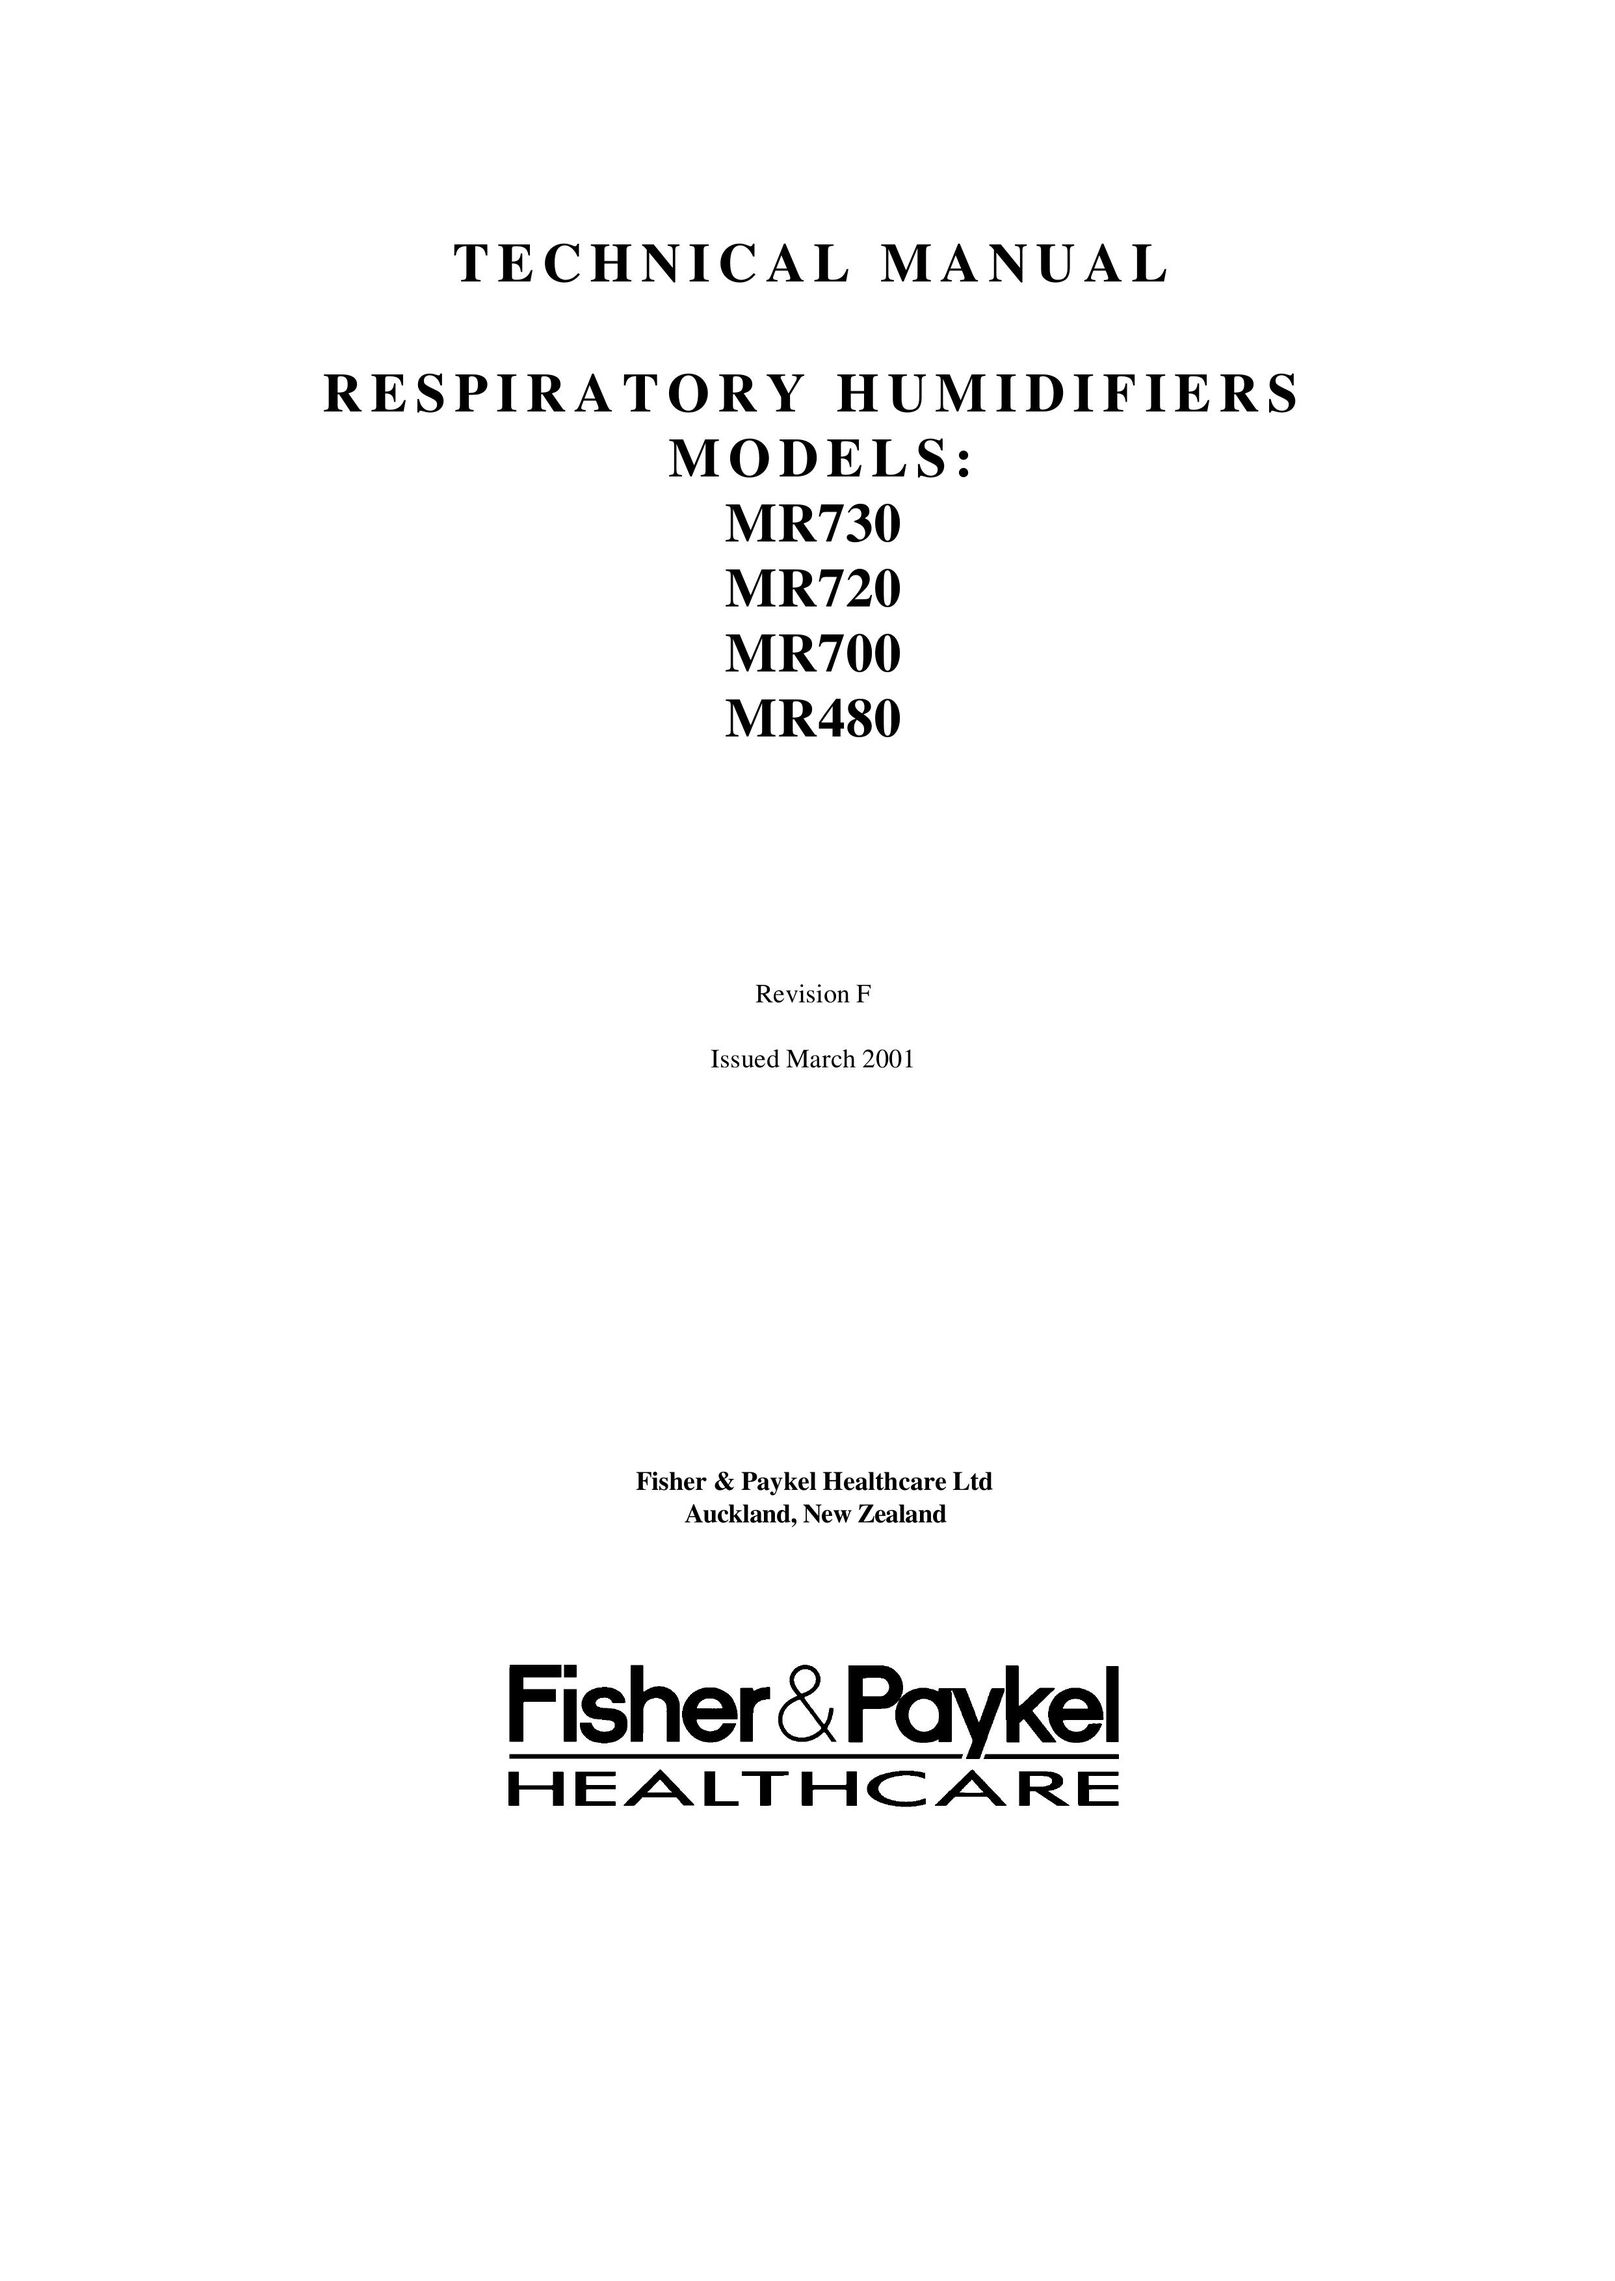 Fisher & Paykel MR480 Humidifier User Manual